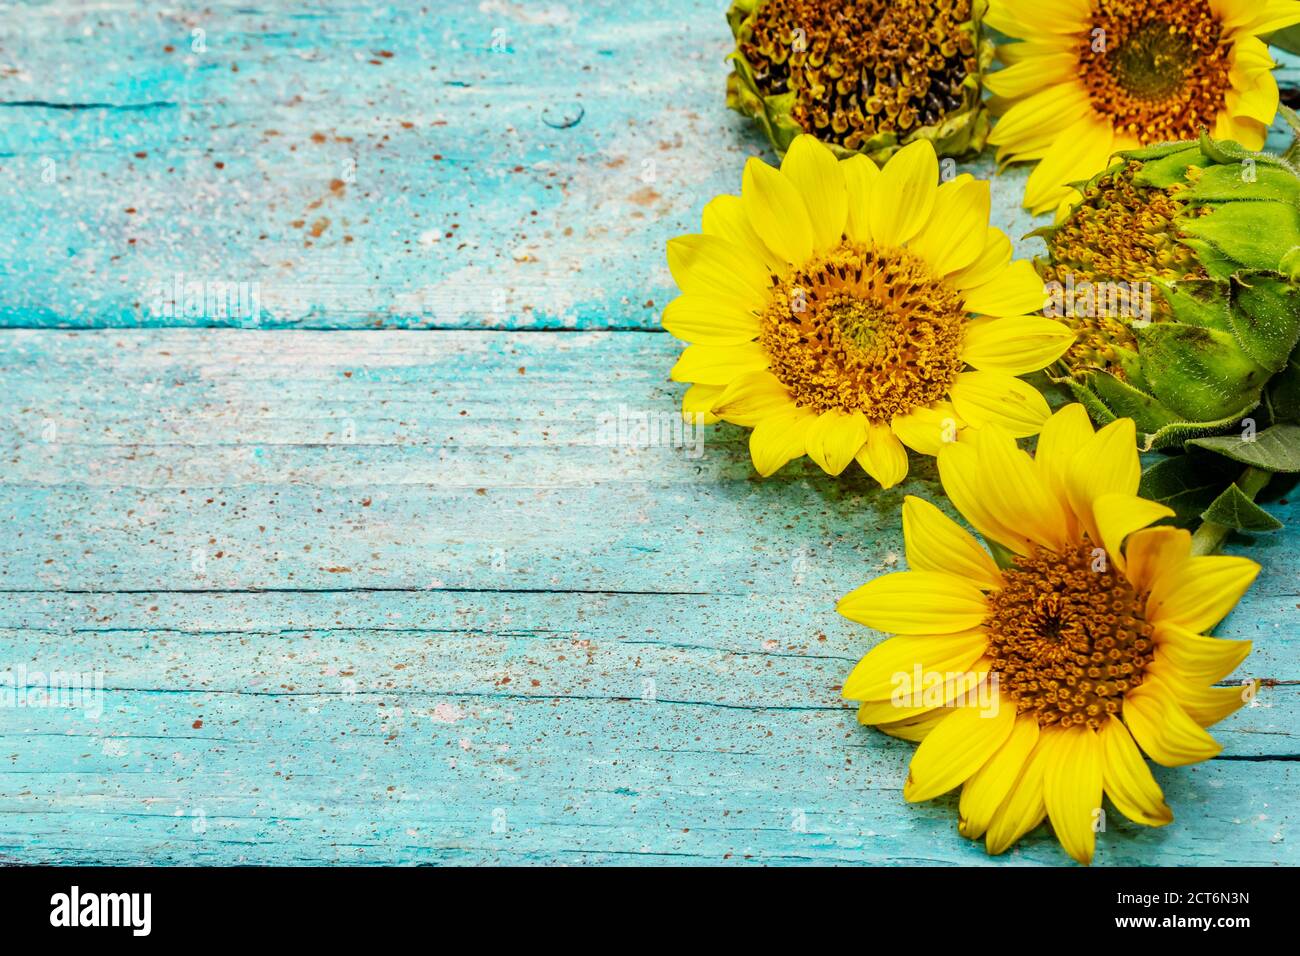 Fresh sunflowers on trendy turquoise wooden boards background. Bright ...